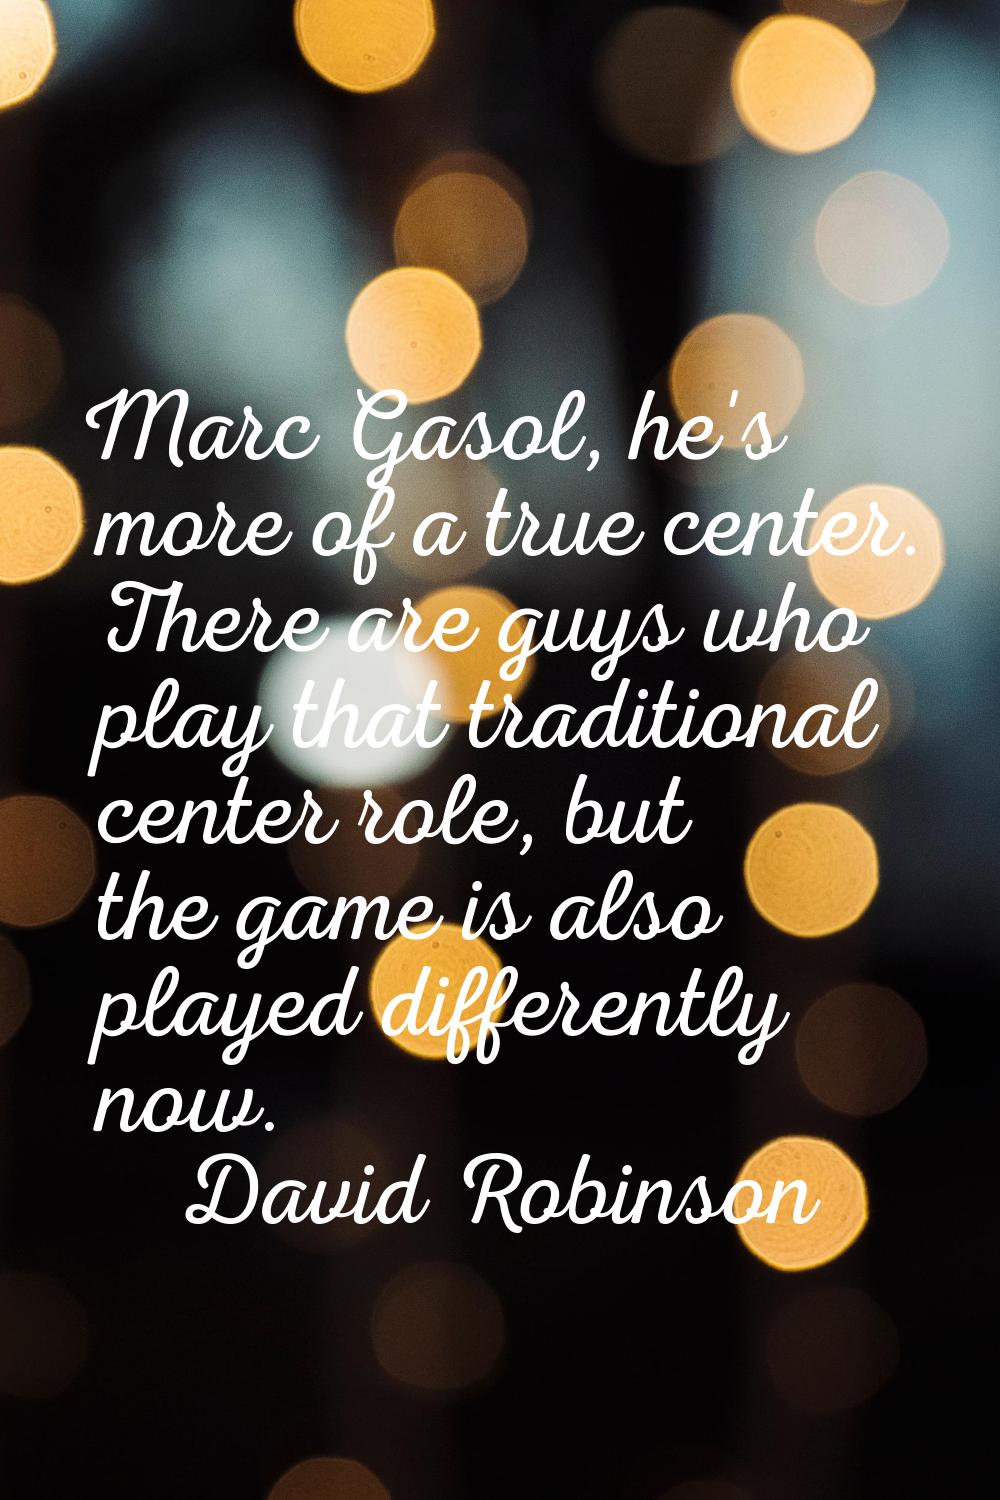 Marc Gasol, he's more of a true center. There are guys who play that traditional center role, but t